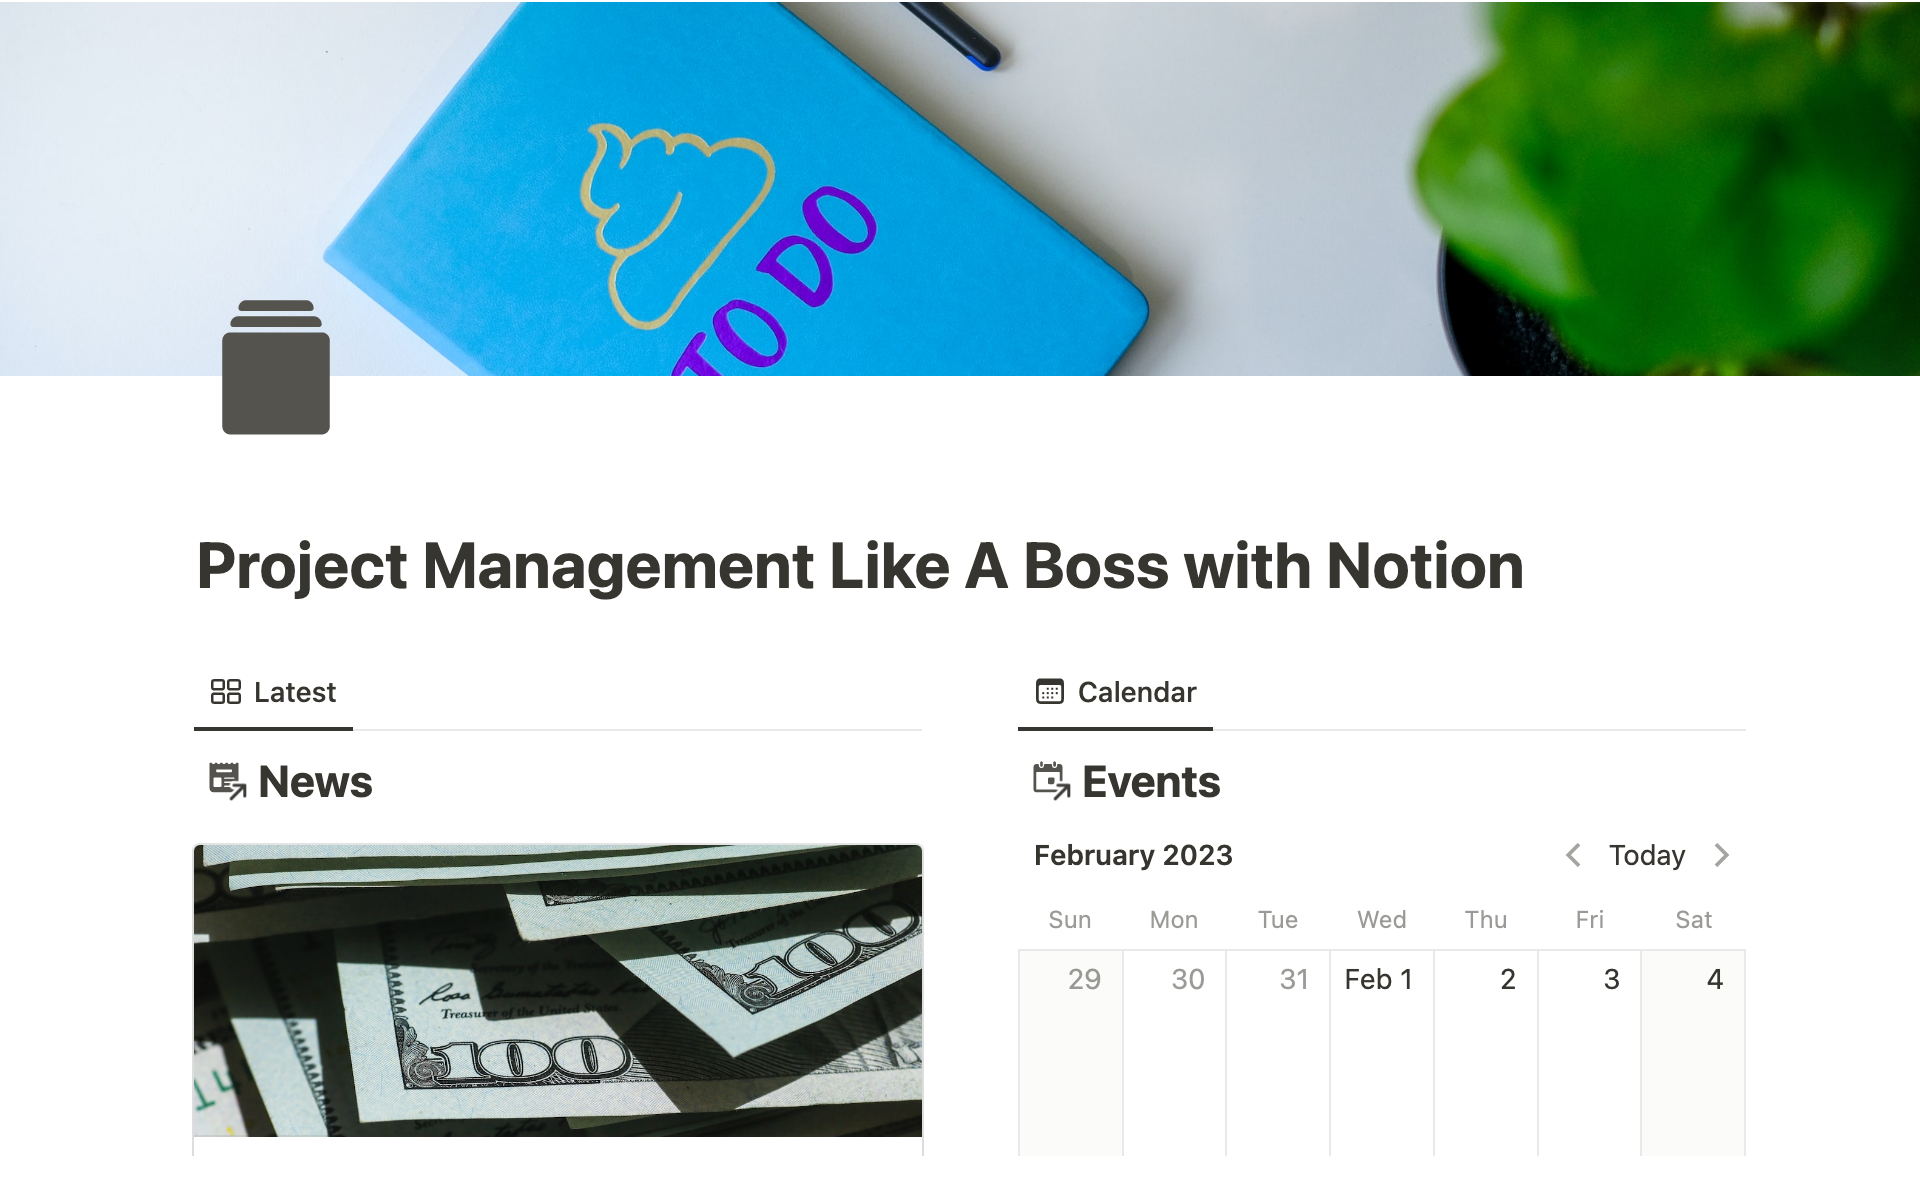 Project Management Like A Boss with Notionのテンプレートのプレビュー